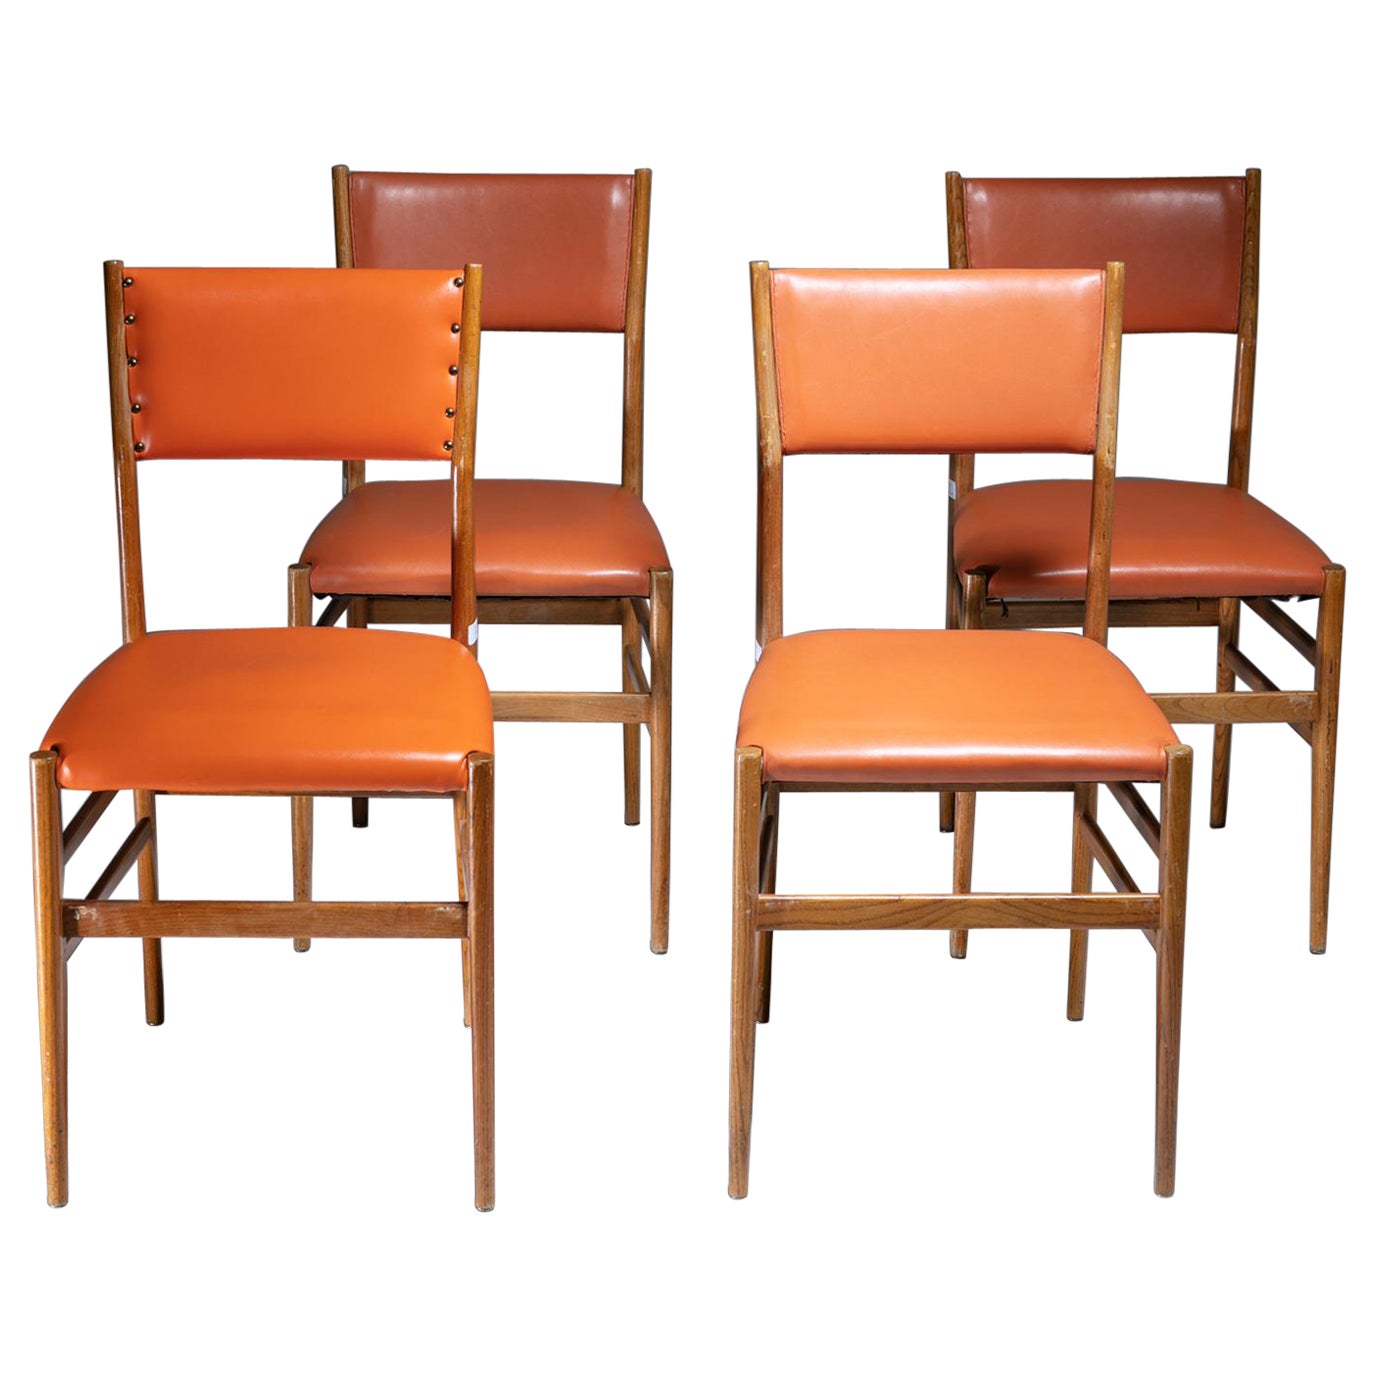 Set of 4 Orange Leather "Leggera" Chairs by Gio Ponti for Cassina, Italy, 1950s For Sale